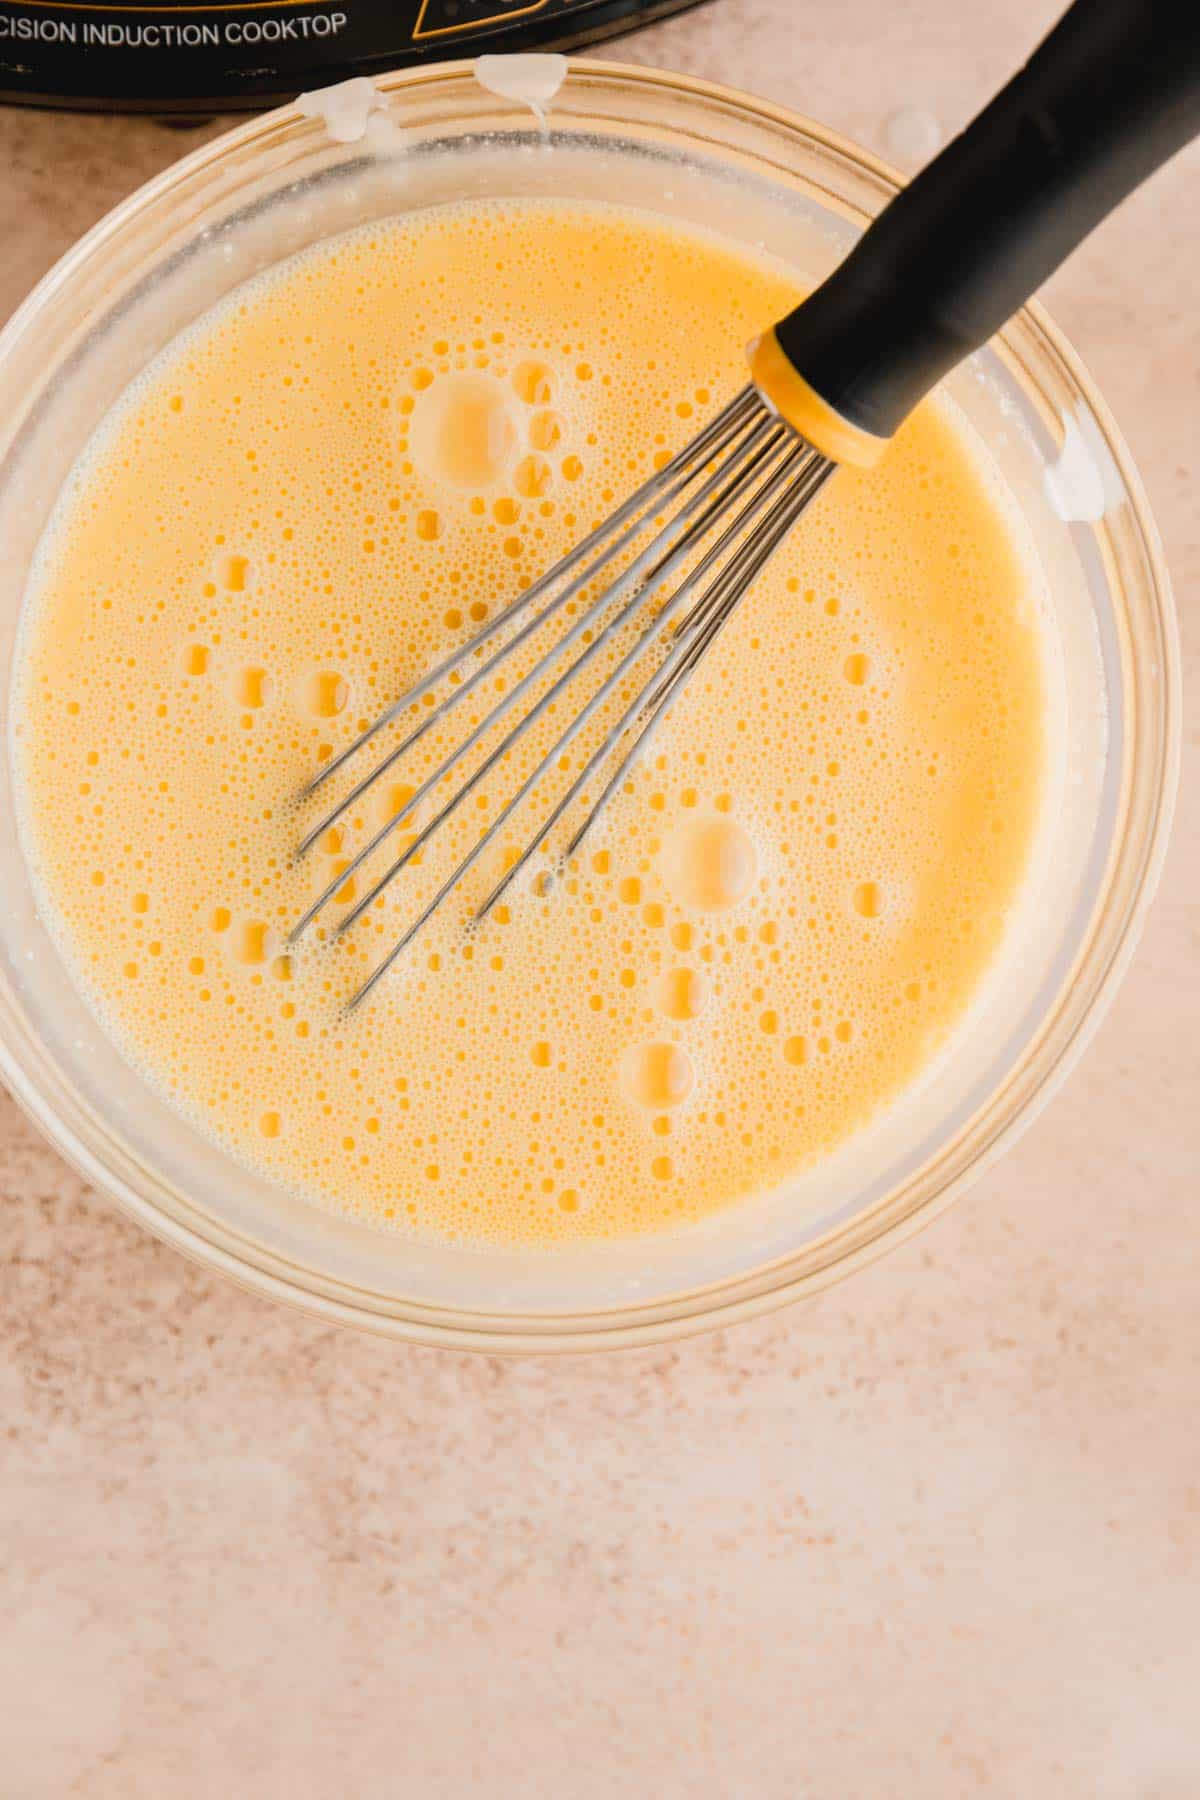 Warm cream mixture being whisked into the egg yolks.